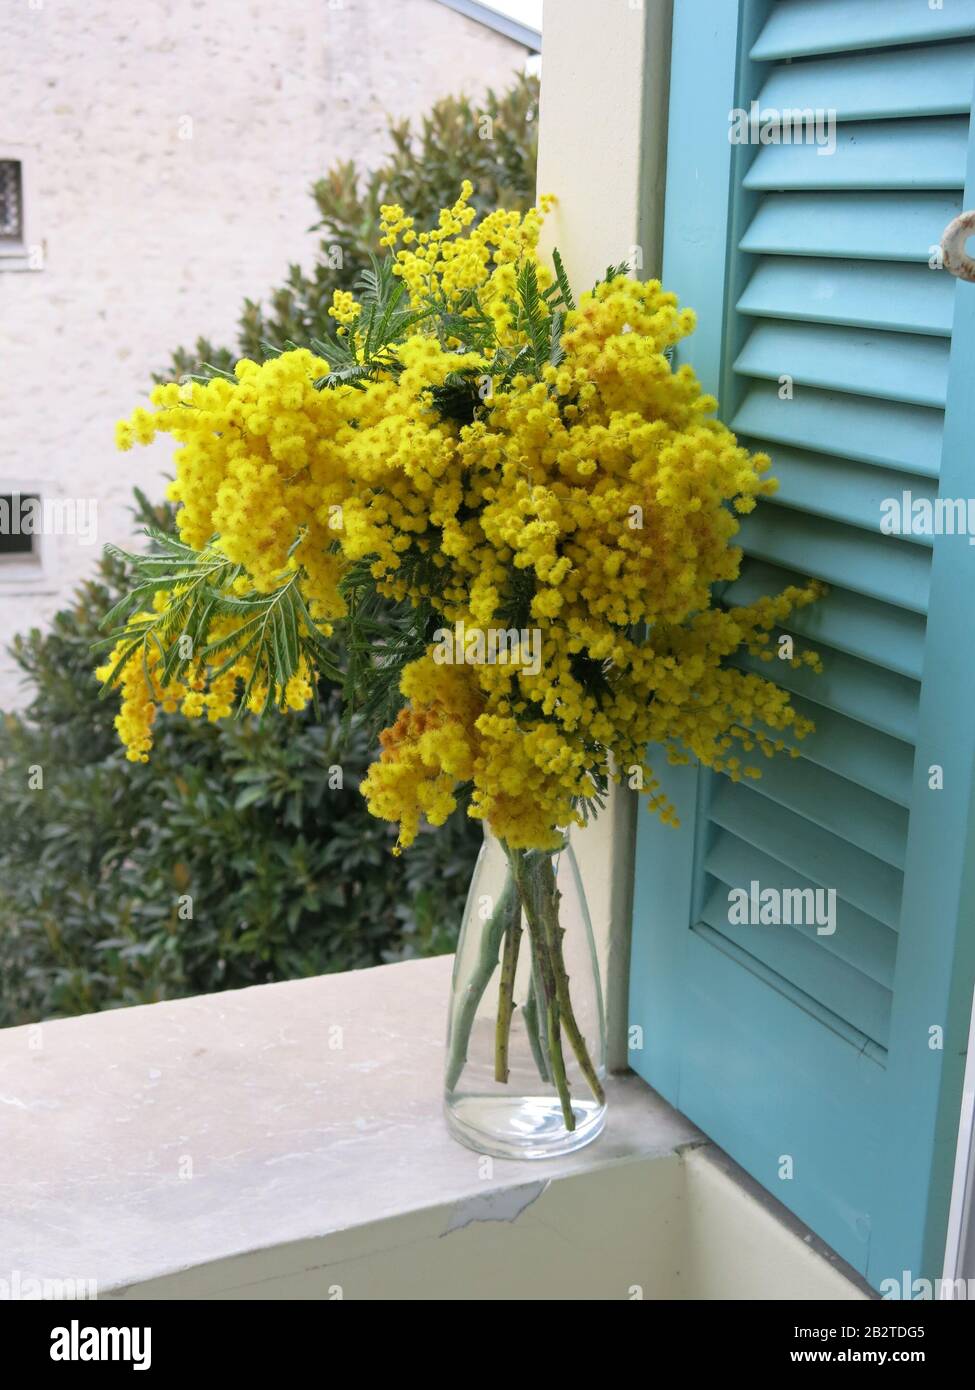 Tall glass vase filled with a big bunch of flowering yellow mimosa, standing on a windowsill against turquoise louvred shutters Stock Photo